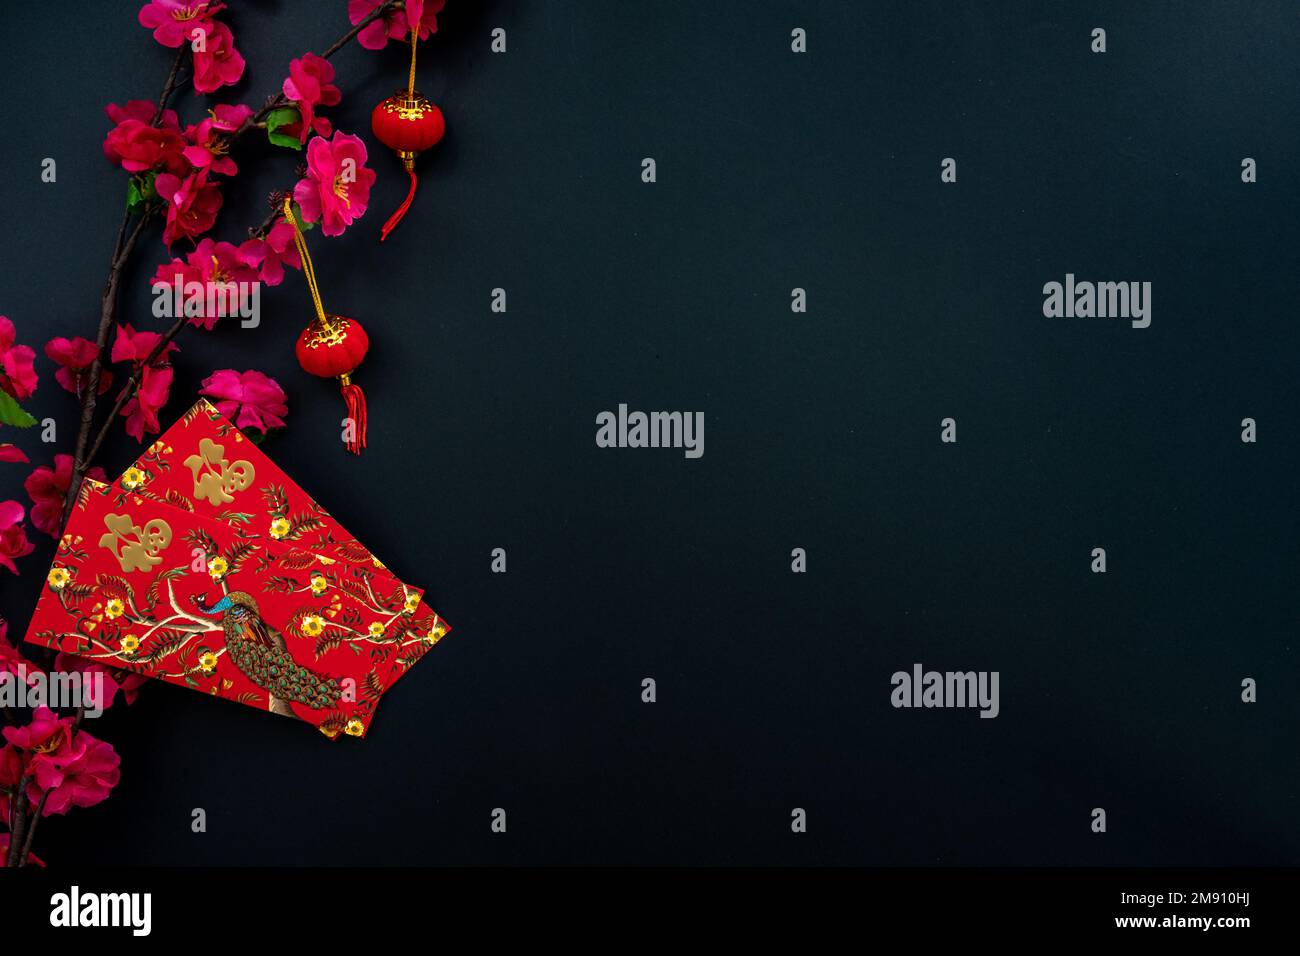 Chinese lunar new year decoration over black background. Flat lay concept with red envelope and plum flower decoration. Stock Photo